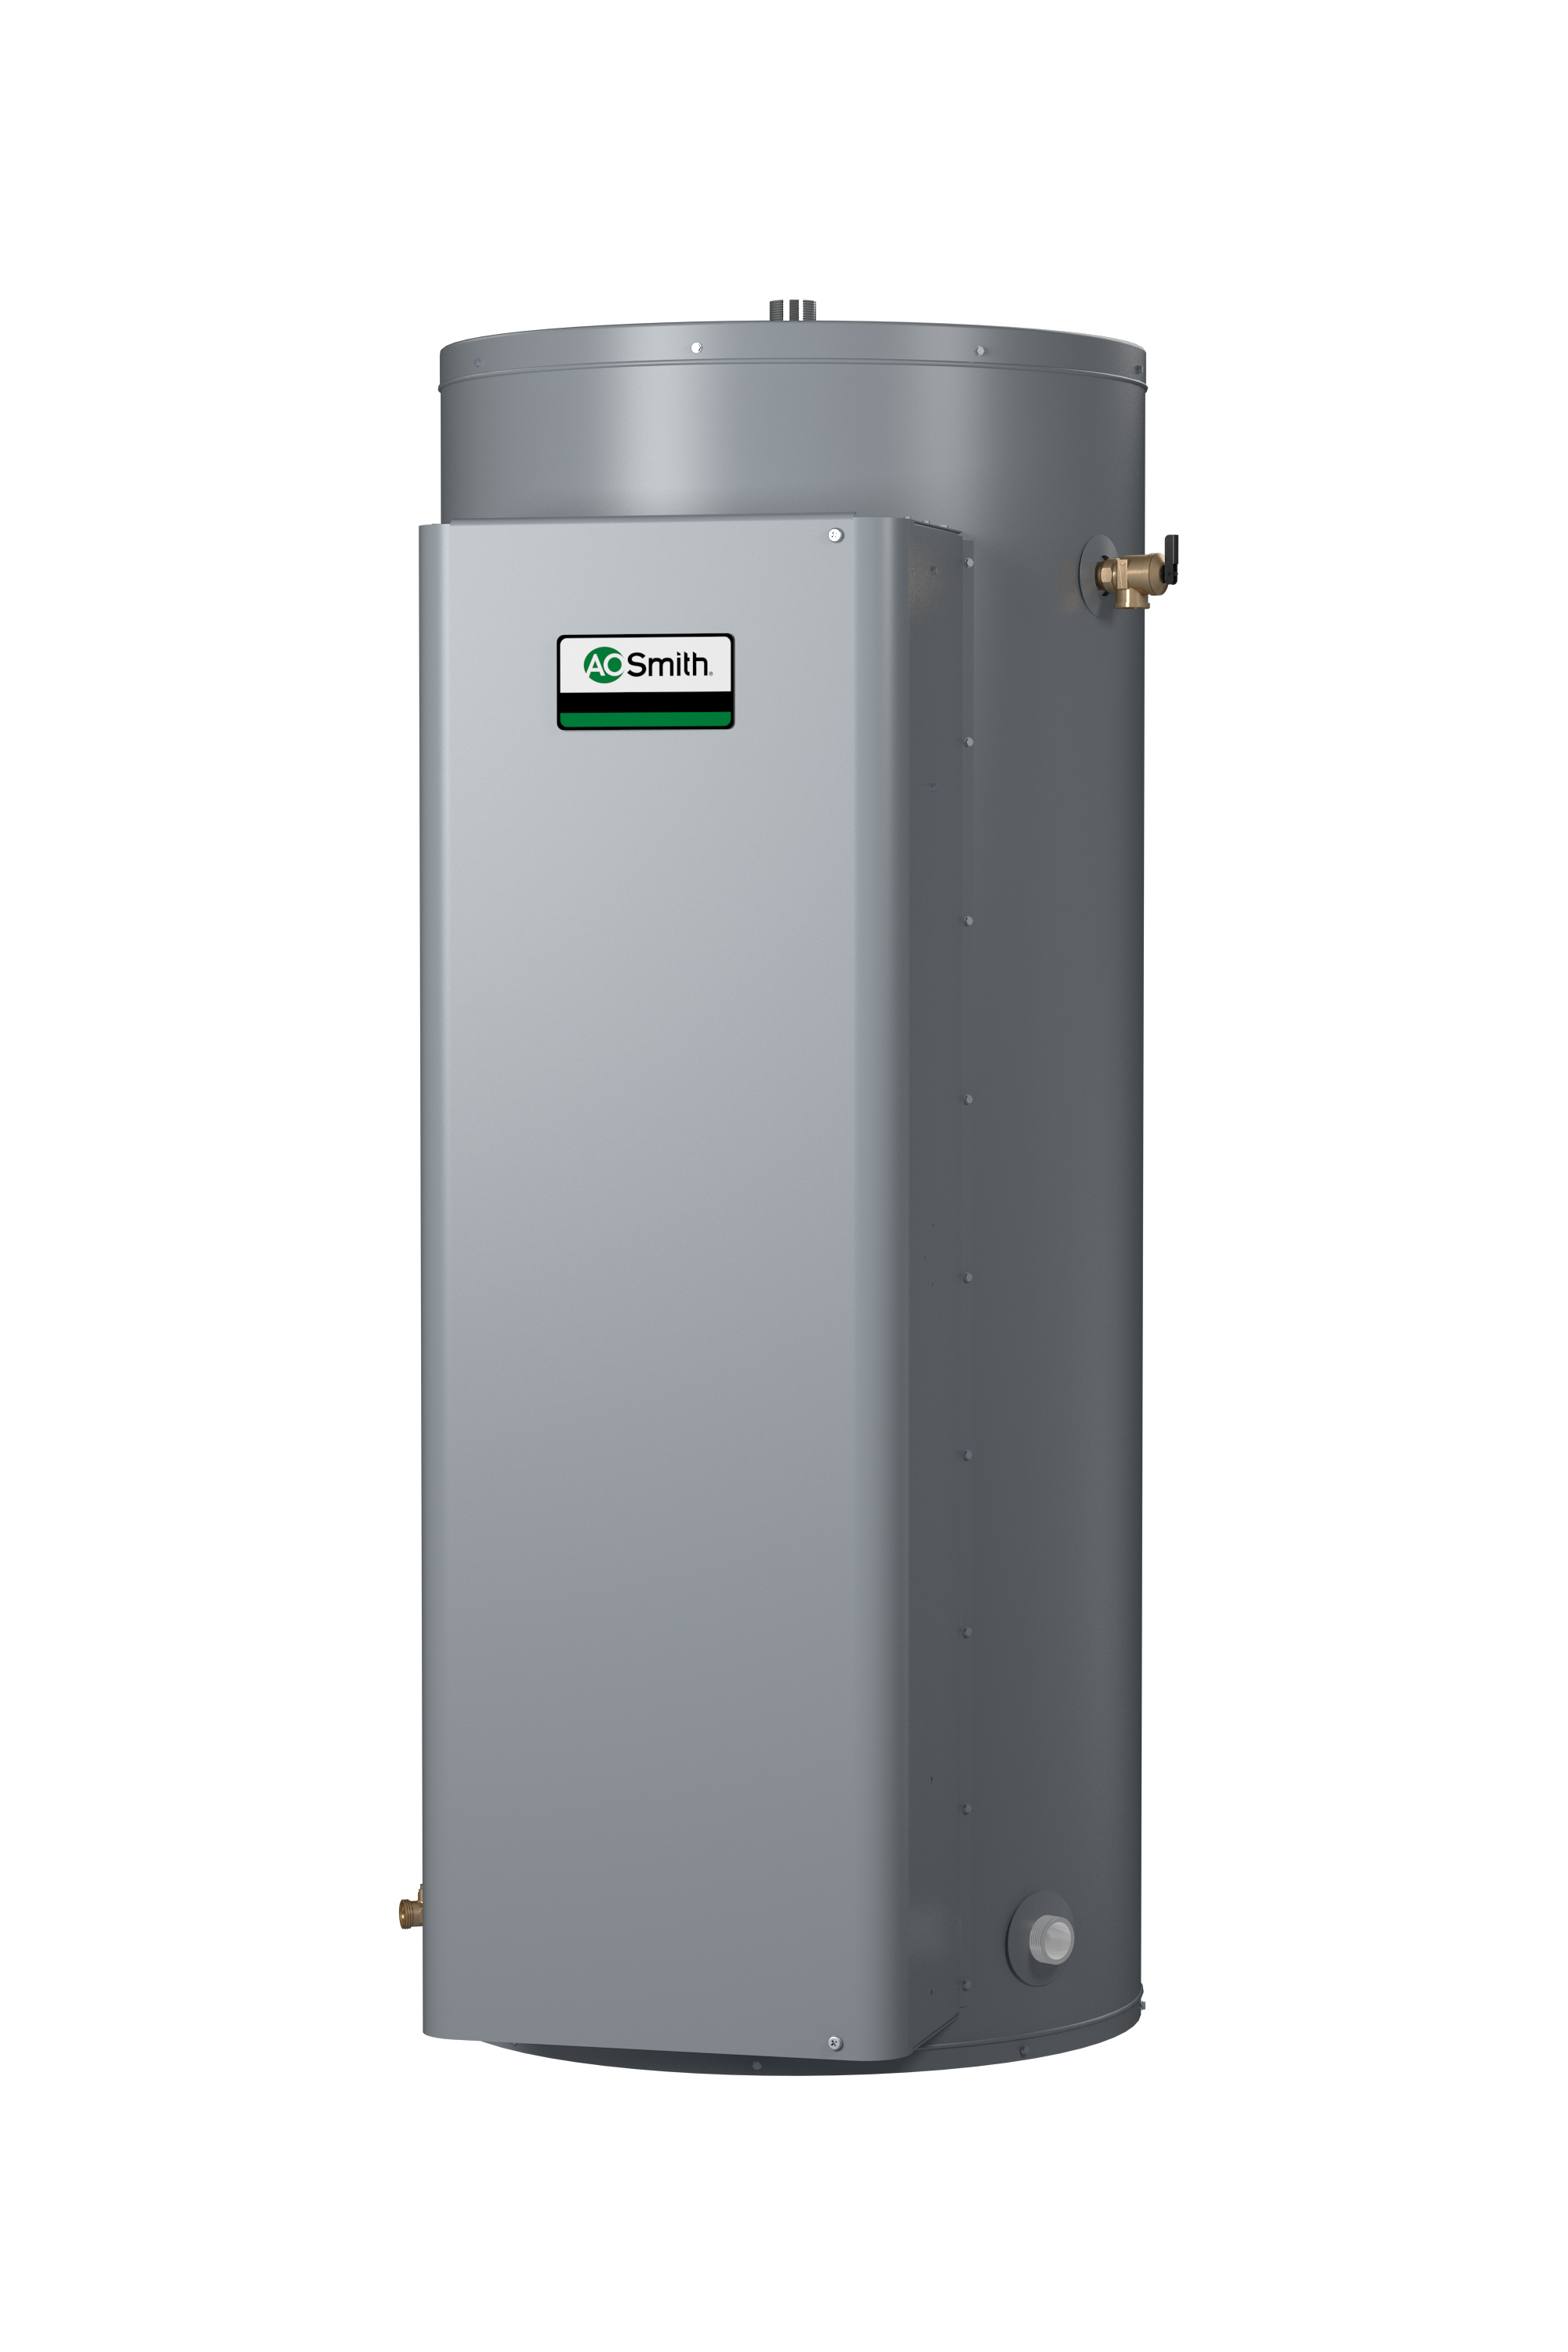 AO SMITH DRE-80-15, 80 GALLONS, 15.0KW, 480 VOLT, 18 AMPS, 3 PHASE, 3 ELEMENT, COMMERCIAL ELECTRIC WATER HEATER, GOLD SERIES